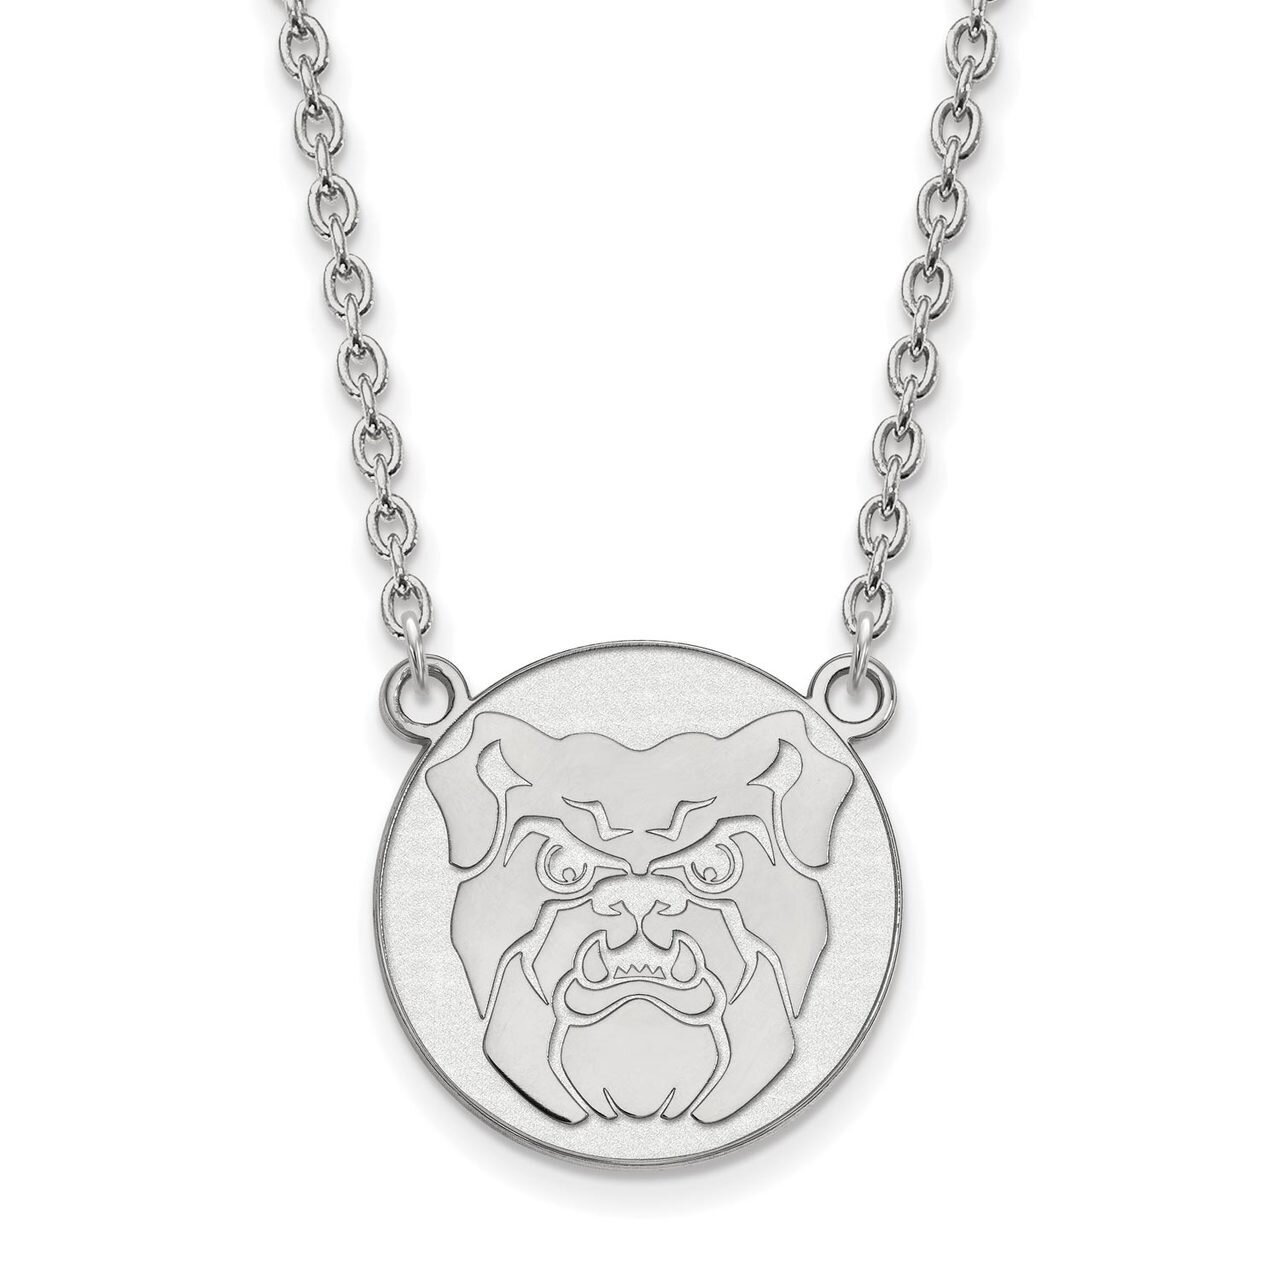 Butler University Large Pendant with Chain Necklace 14k White Gold 4W008BUT-18